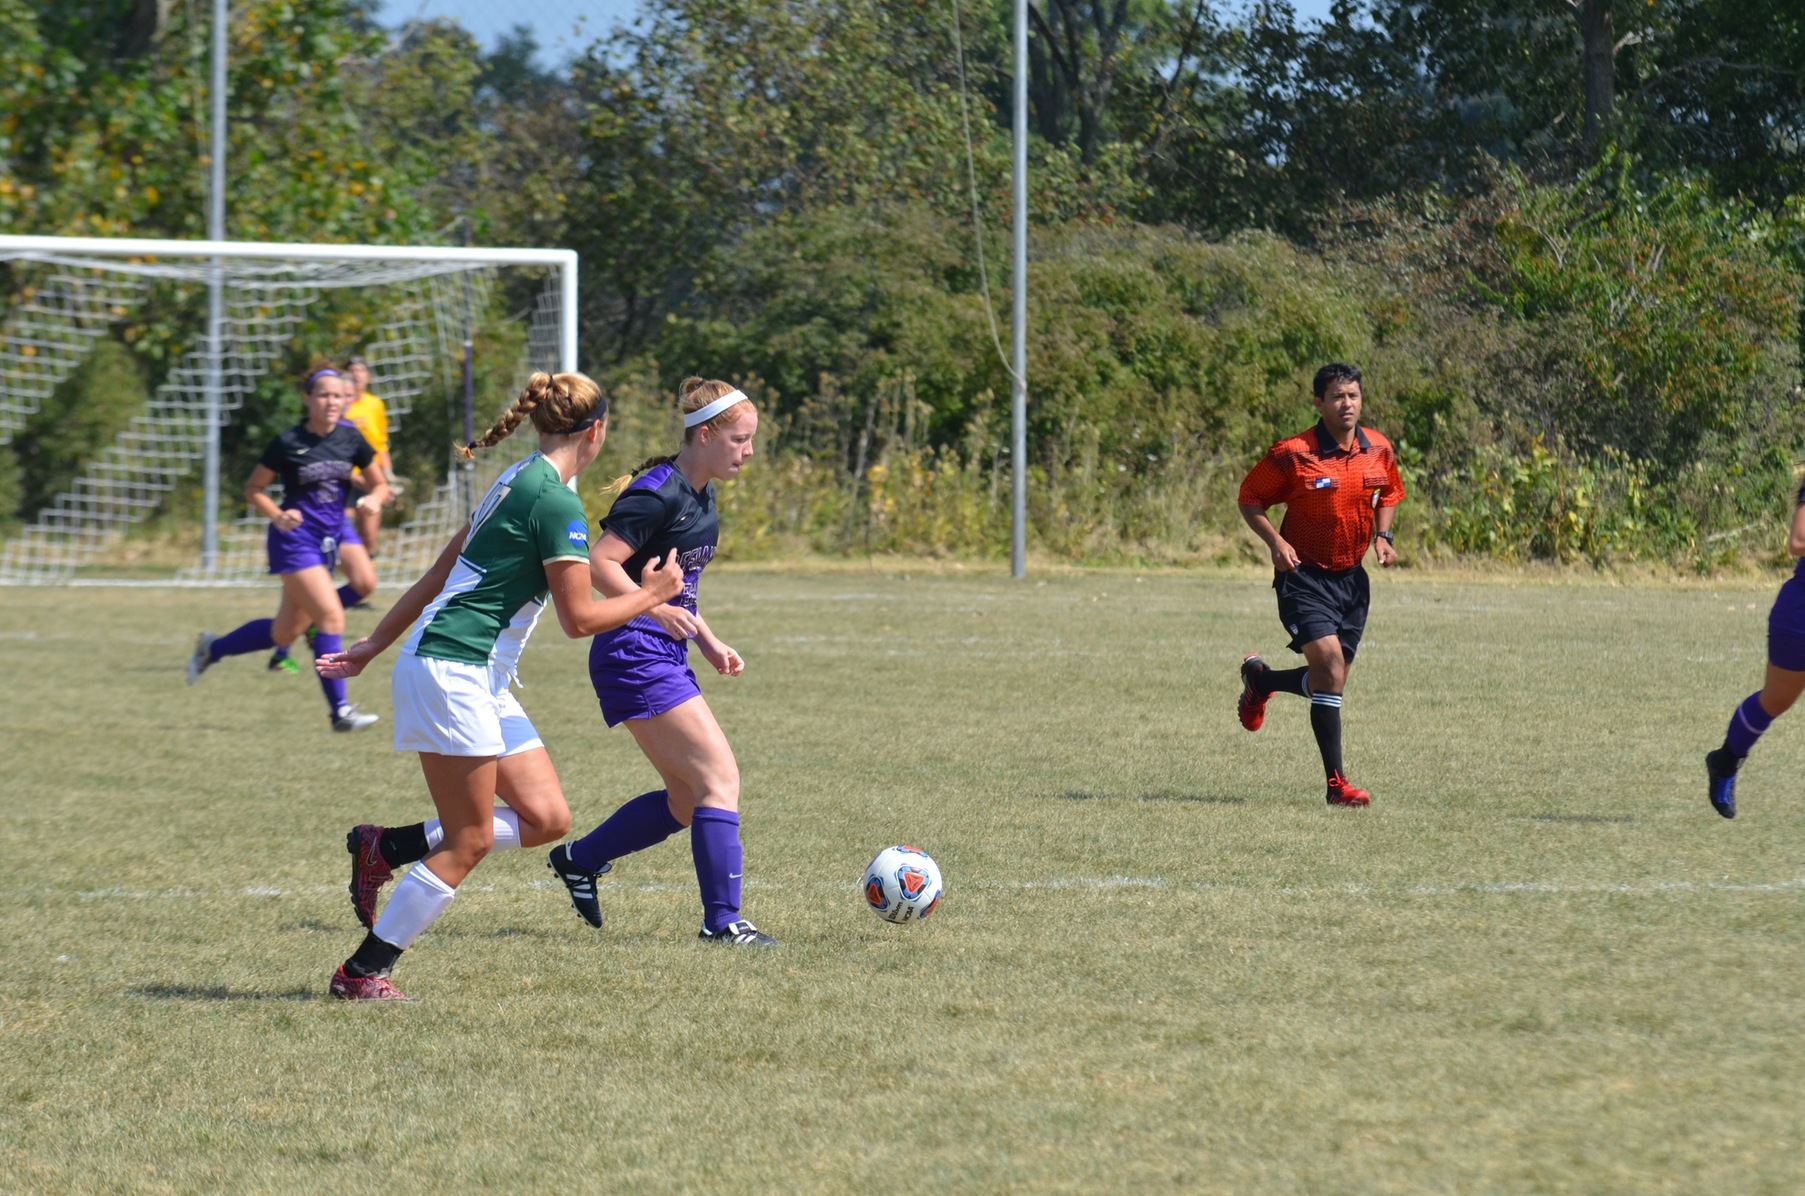 DC Drops Home Match With Earlham 4-0